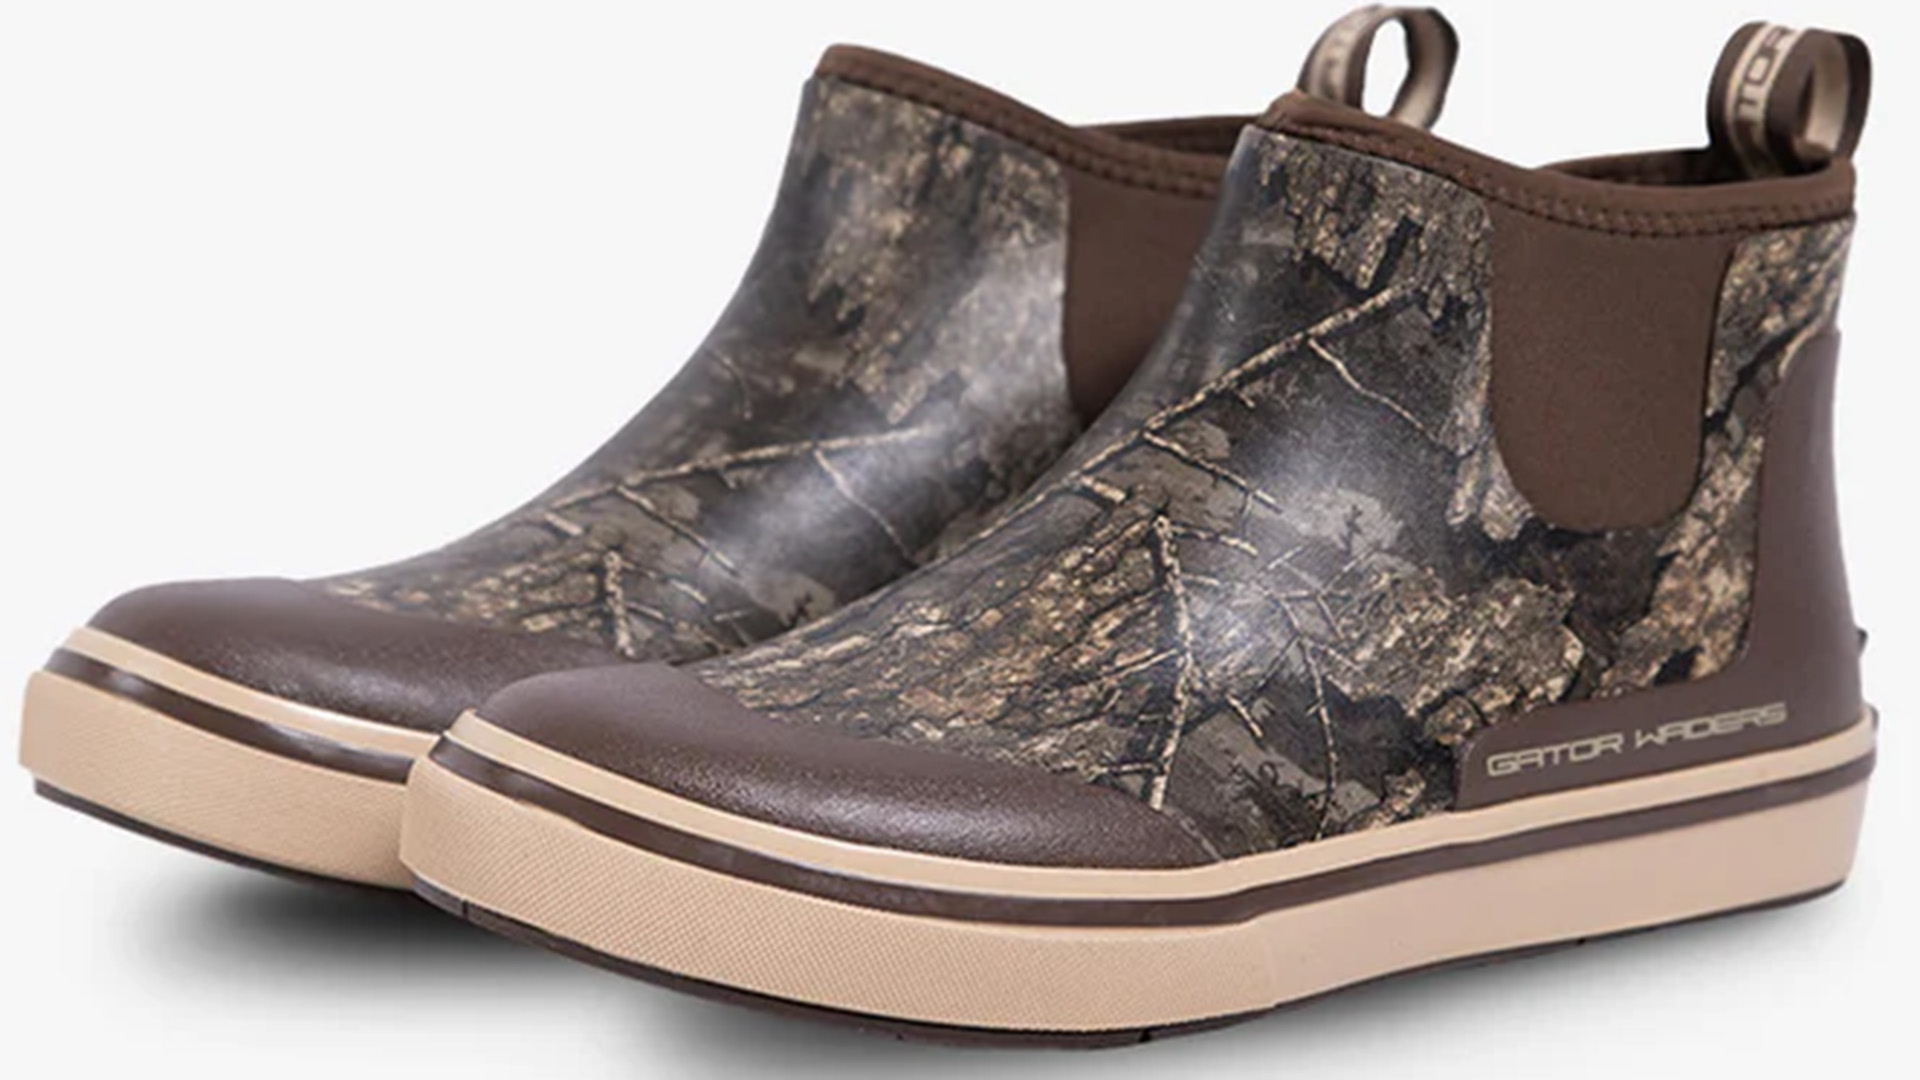 First Look: Gator Waders Realtree Camp Boots